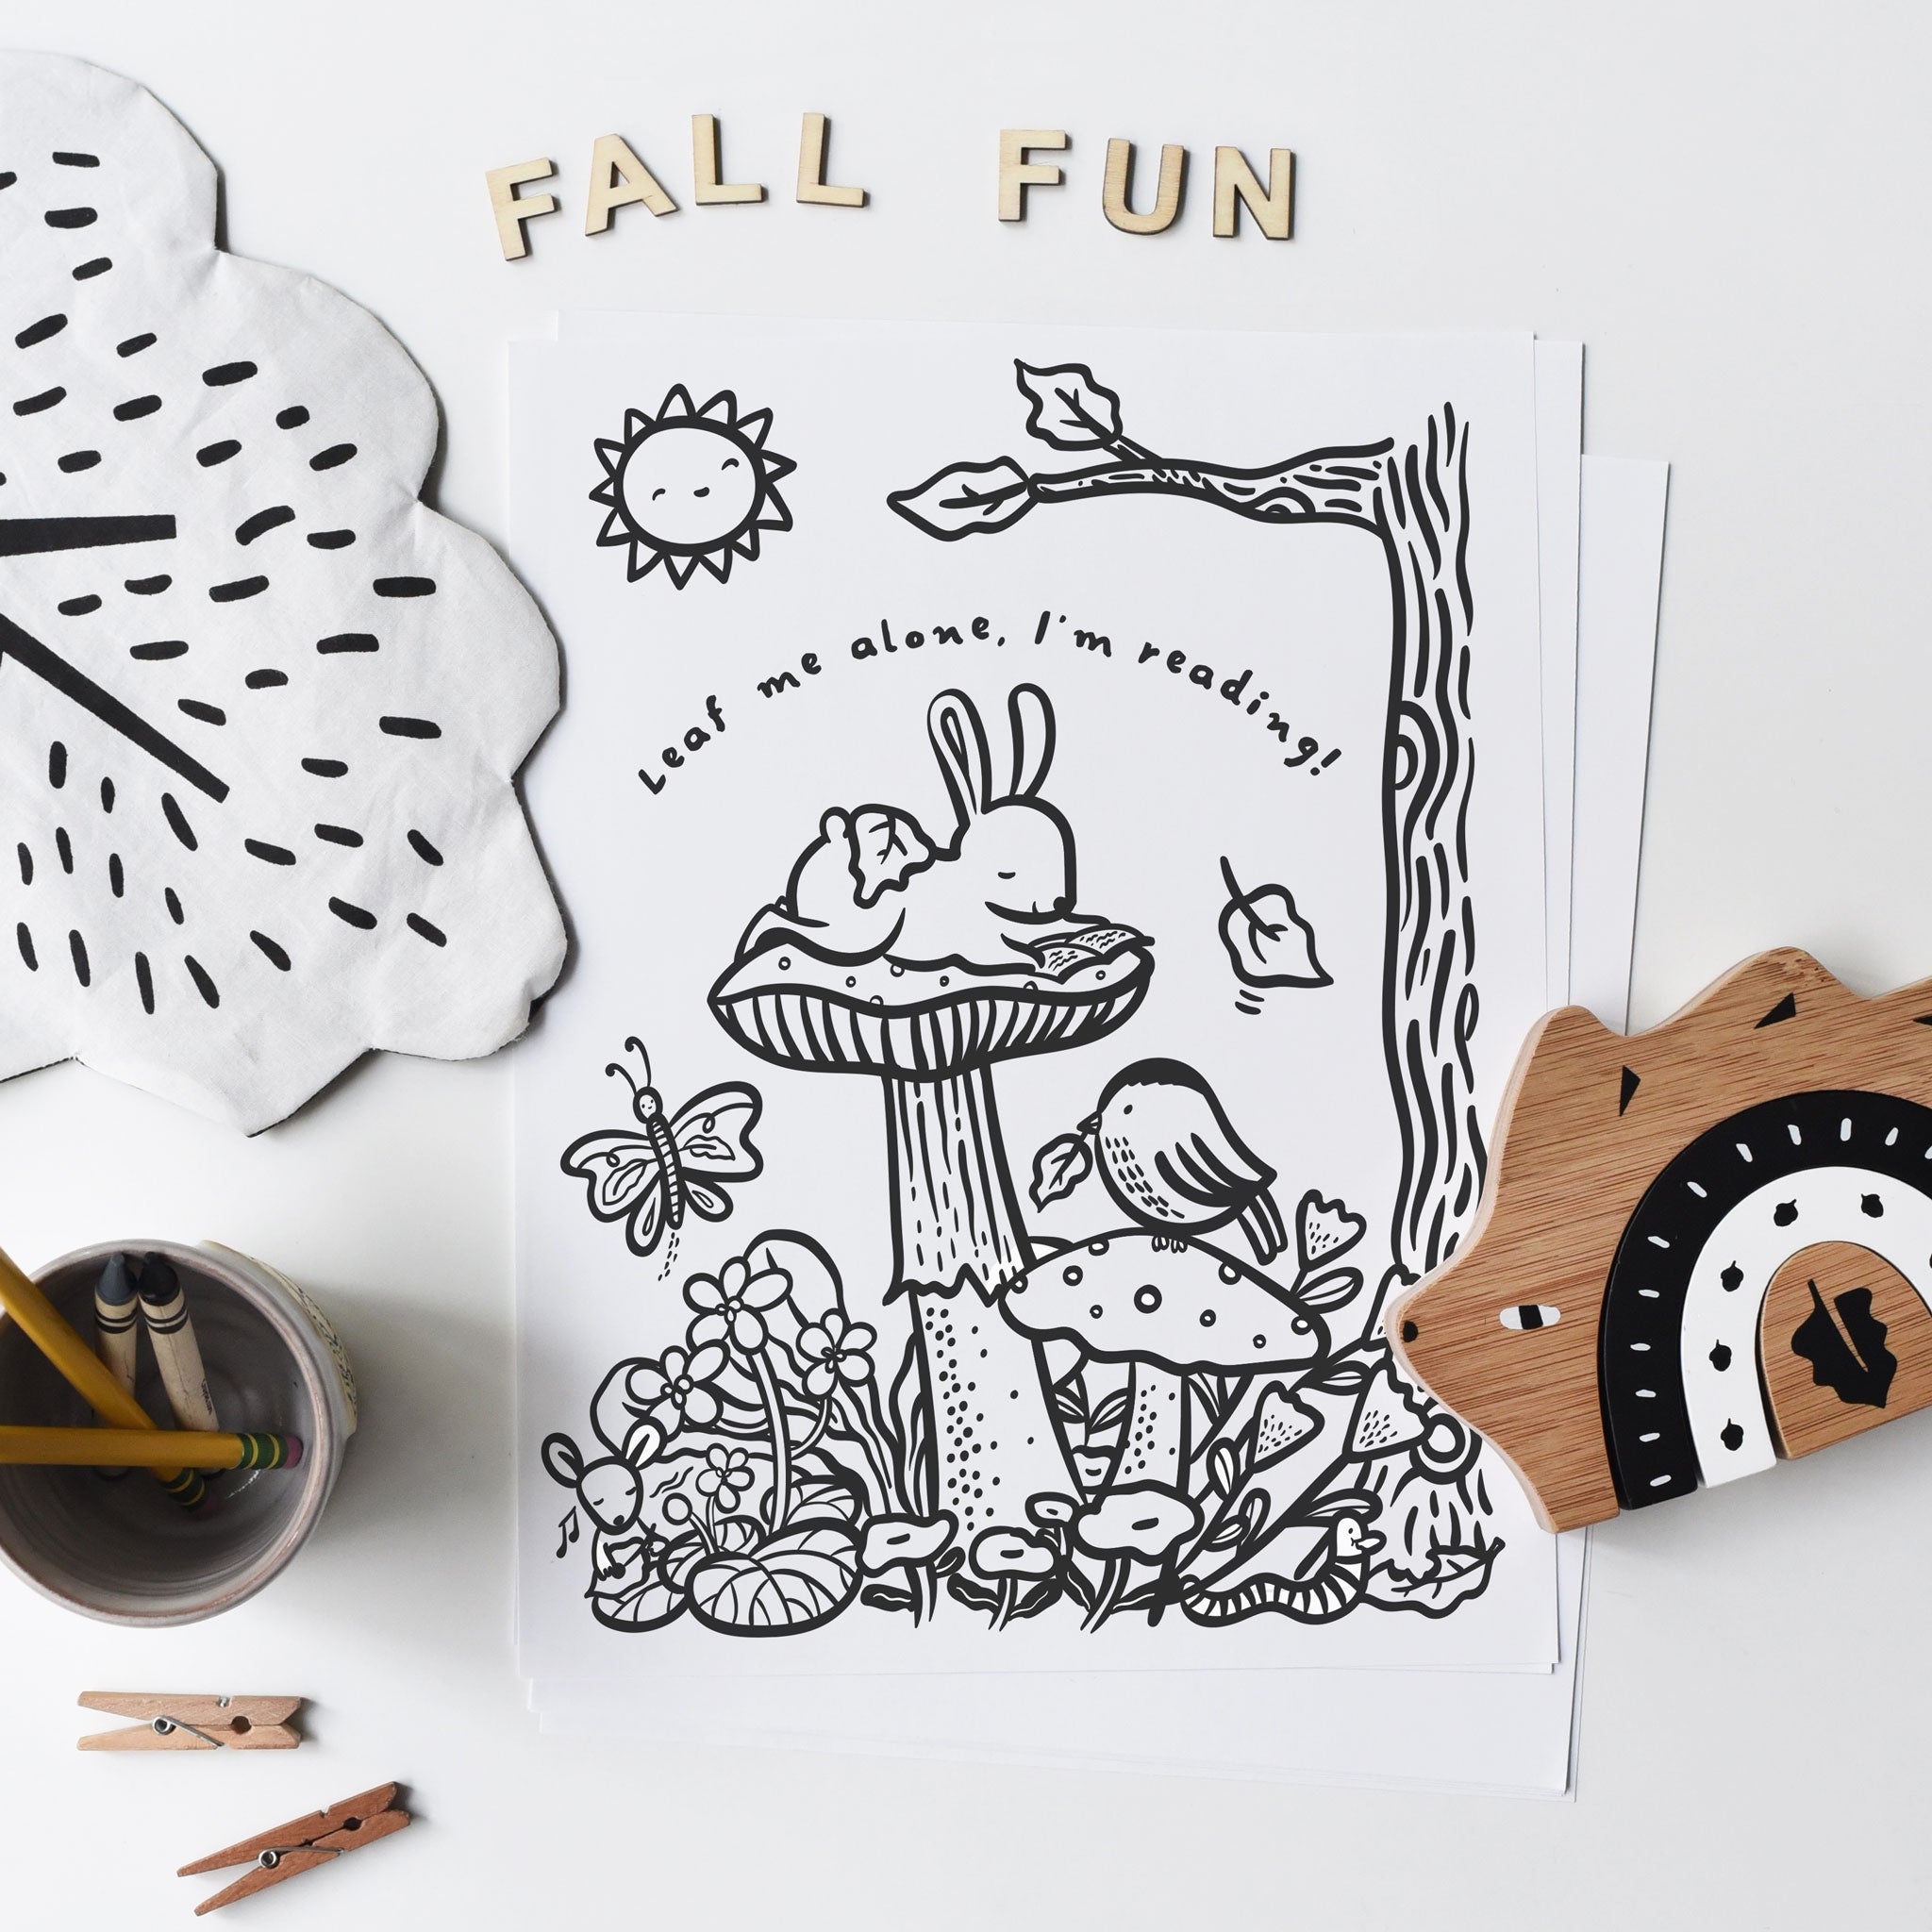 Free Printable Activities for Kids